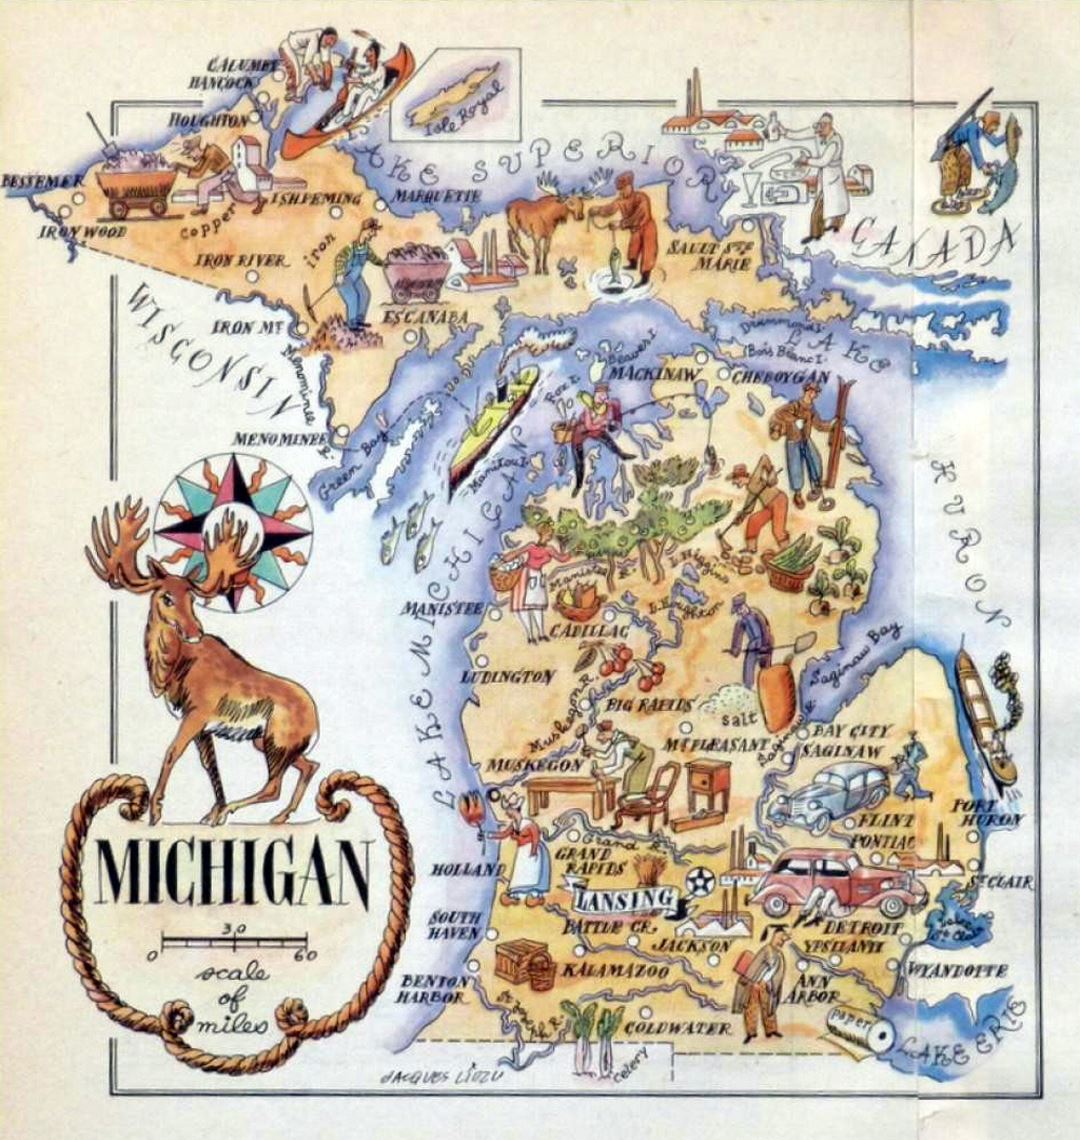 Old illustrated travel map of Michigan state - 1946